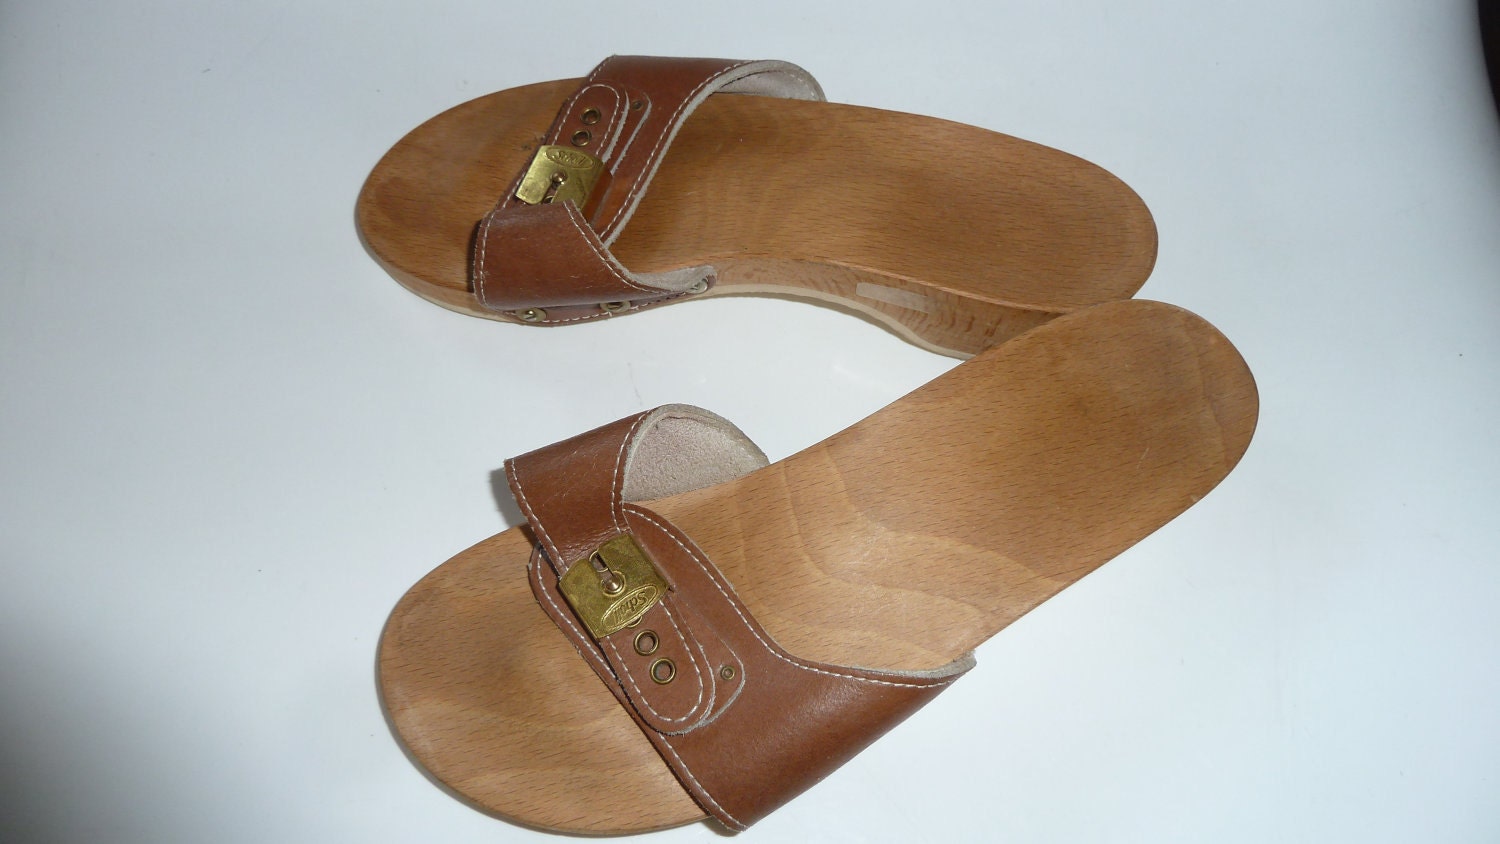 Vintage 1970's Dr Scholl's Exercise Wooden Sandals by LovenPiece